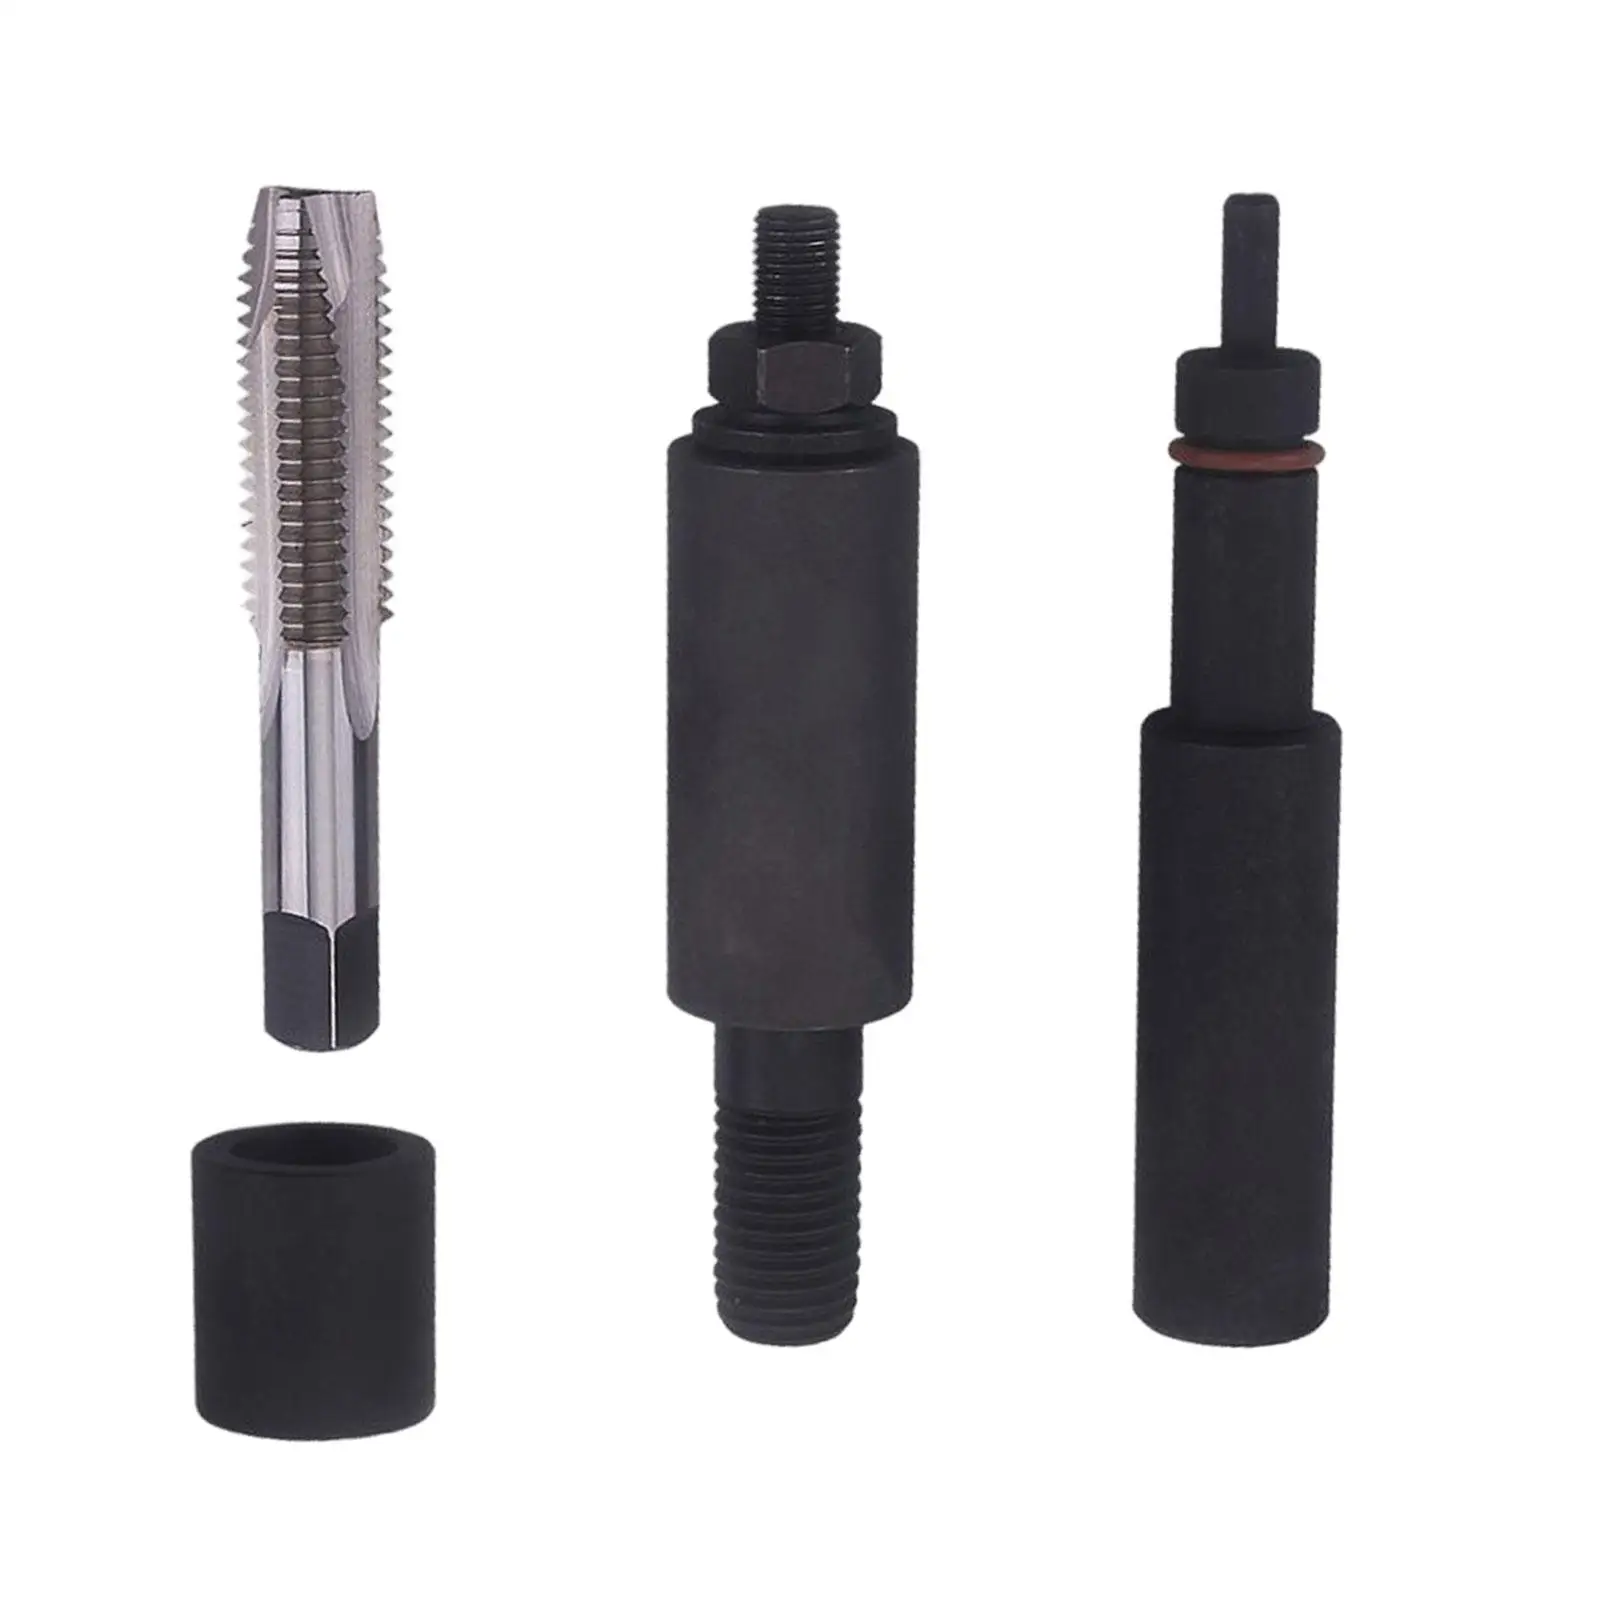 Fuel Injector Sleeve Cup Remover Installer Kit High Performance Car Repair Tool for Ford 6.0L 6.4L Powerstroke Engines